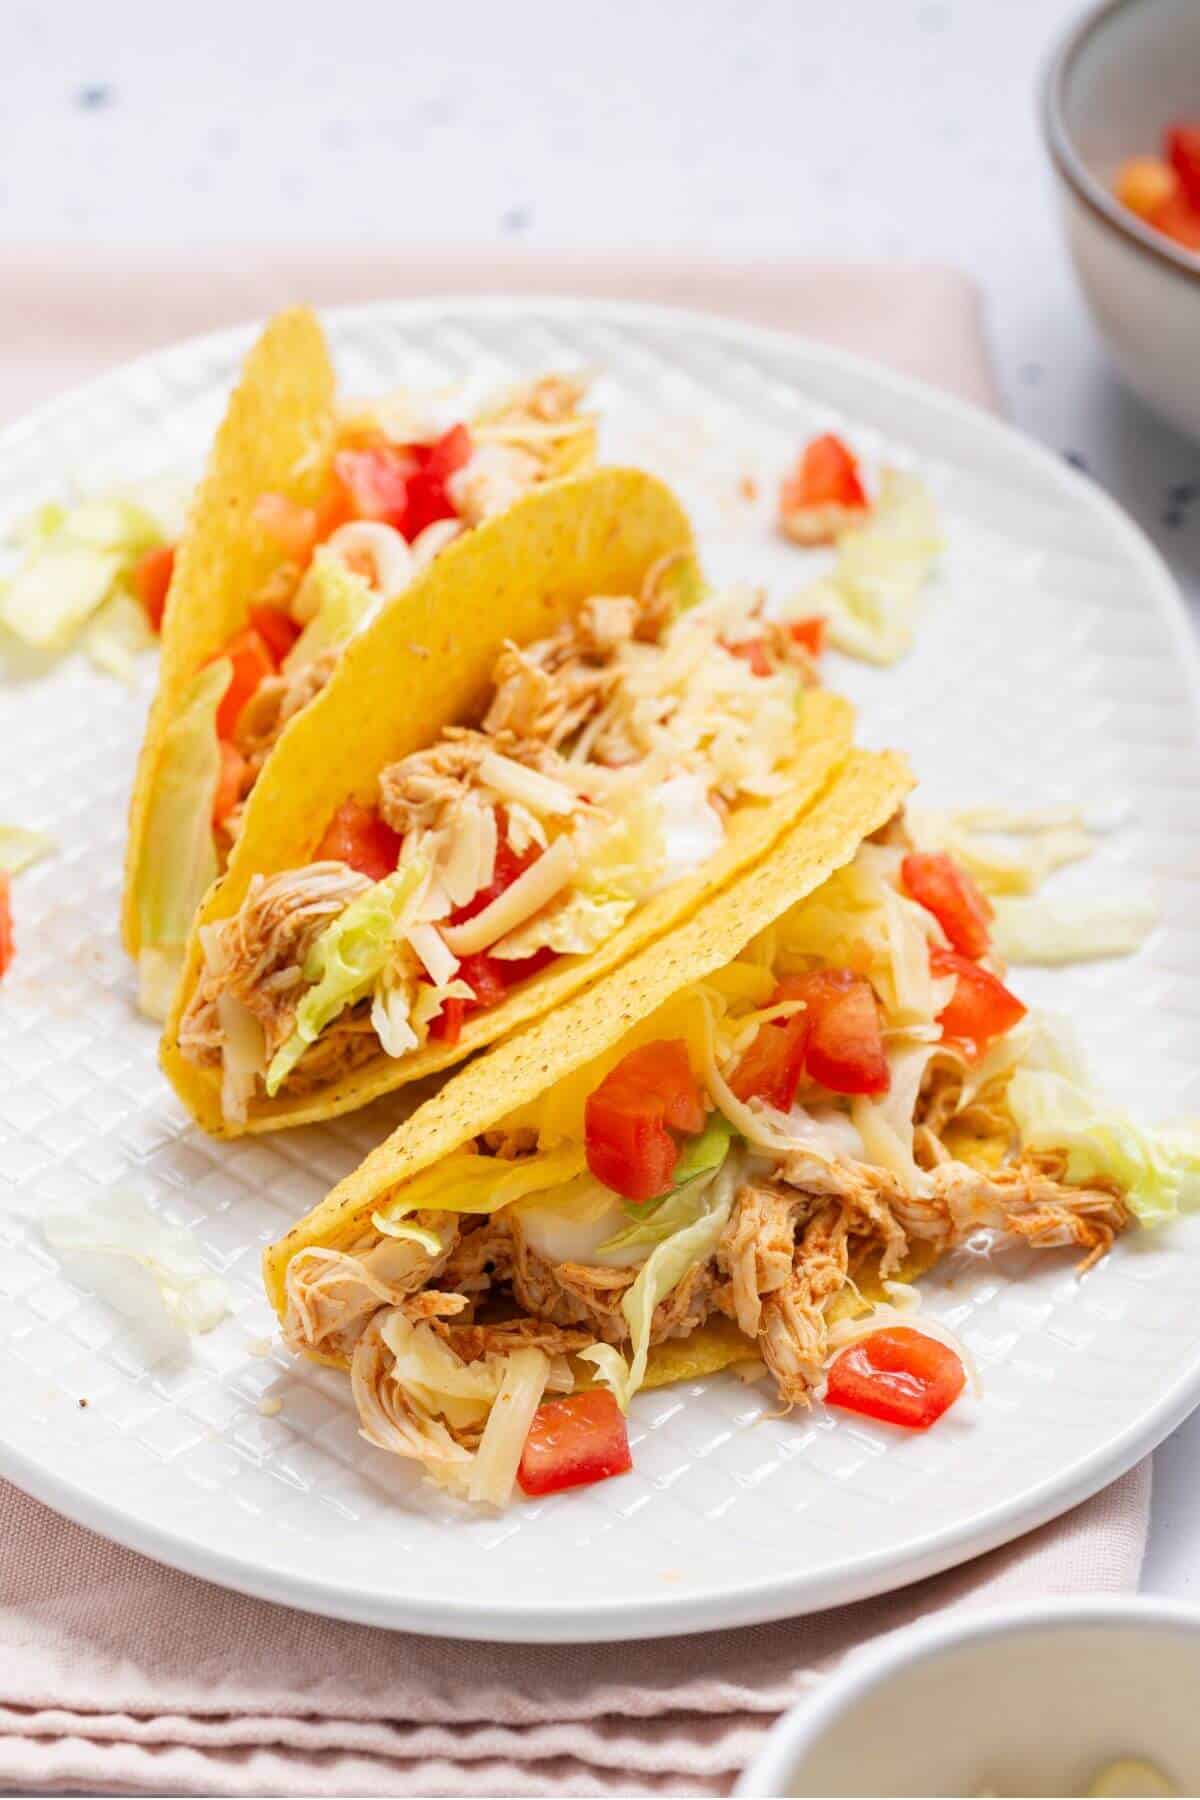 Three tacos on a plate with tomatoes and lettuce.